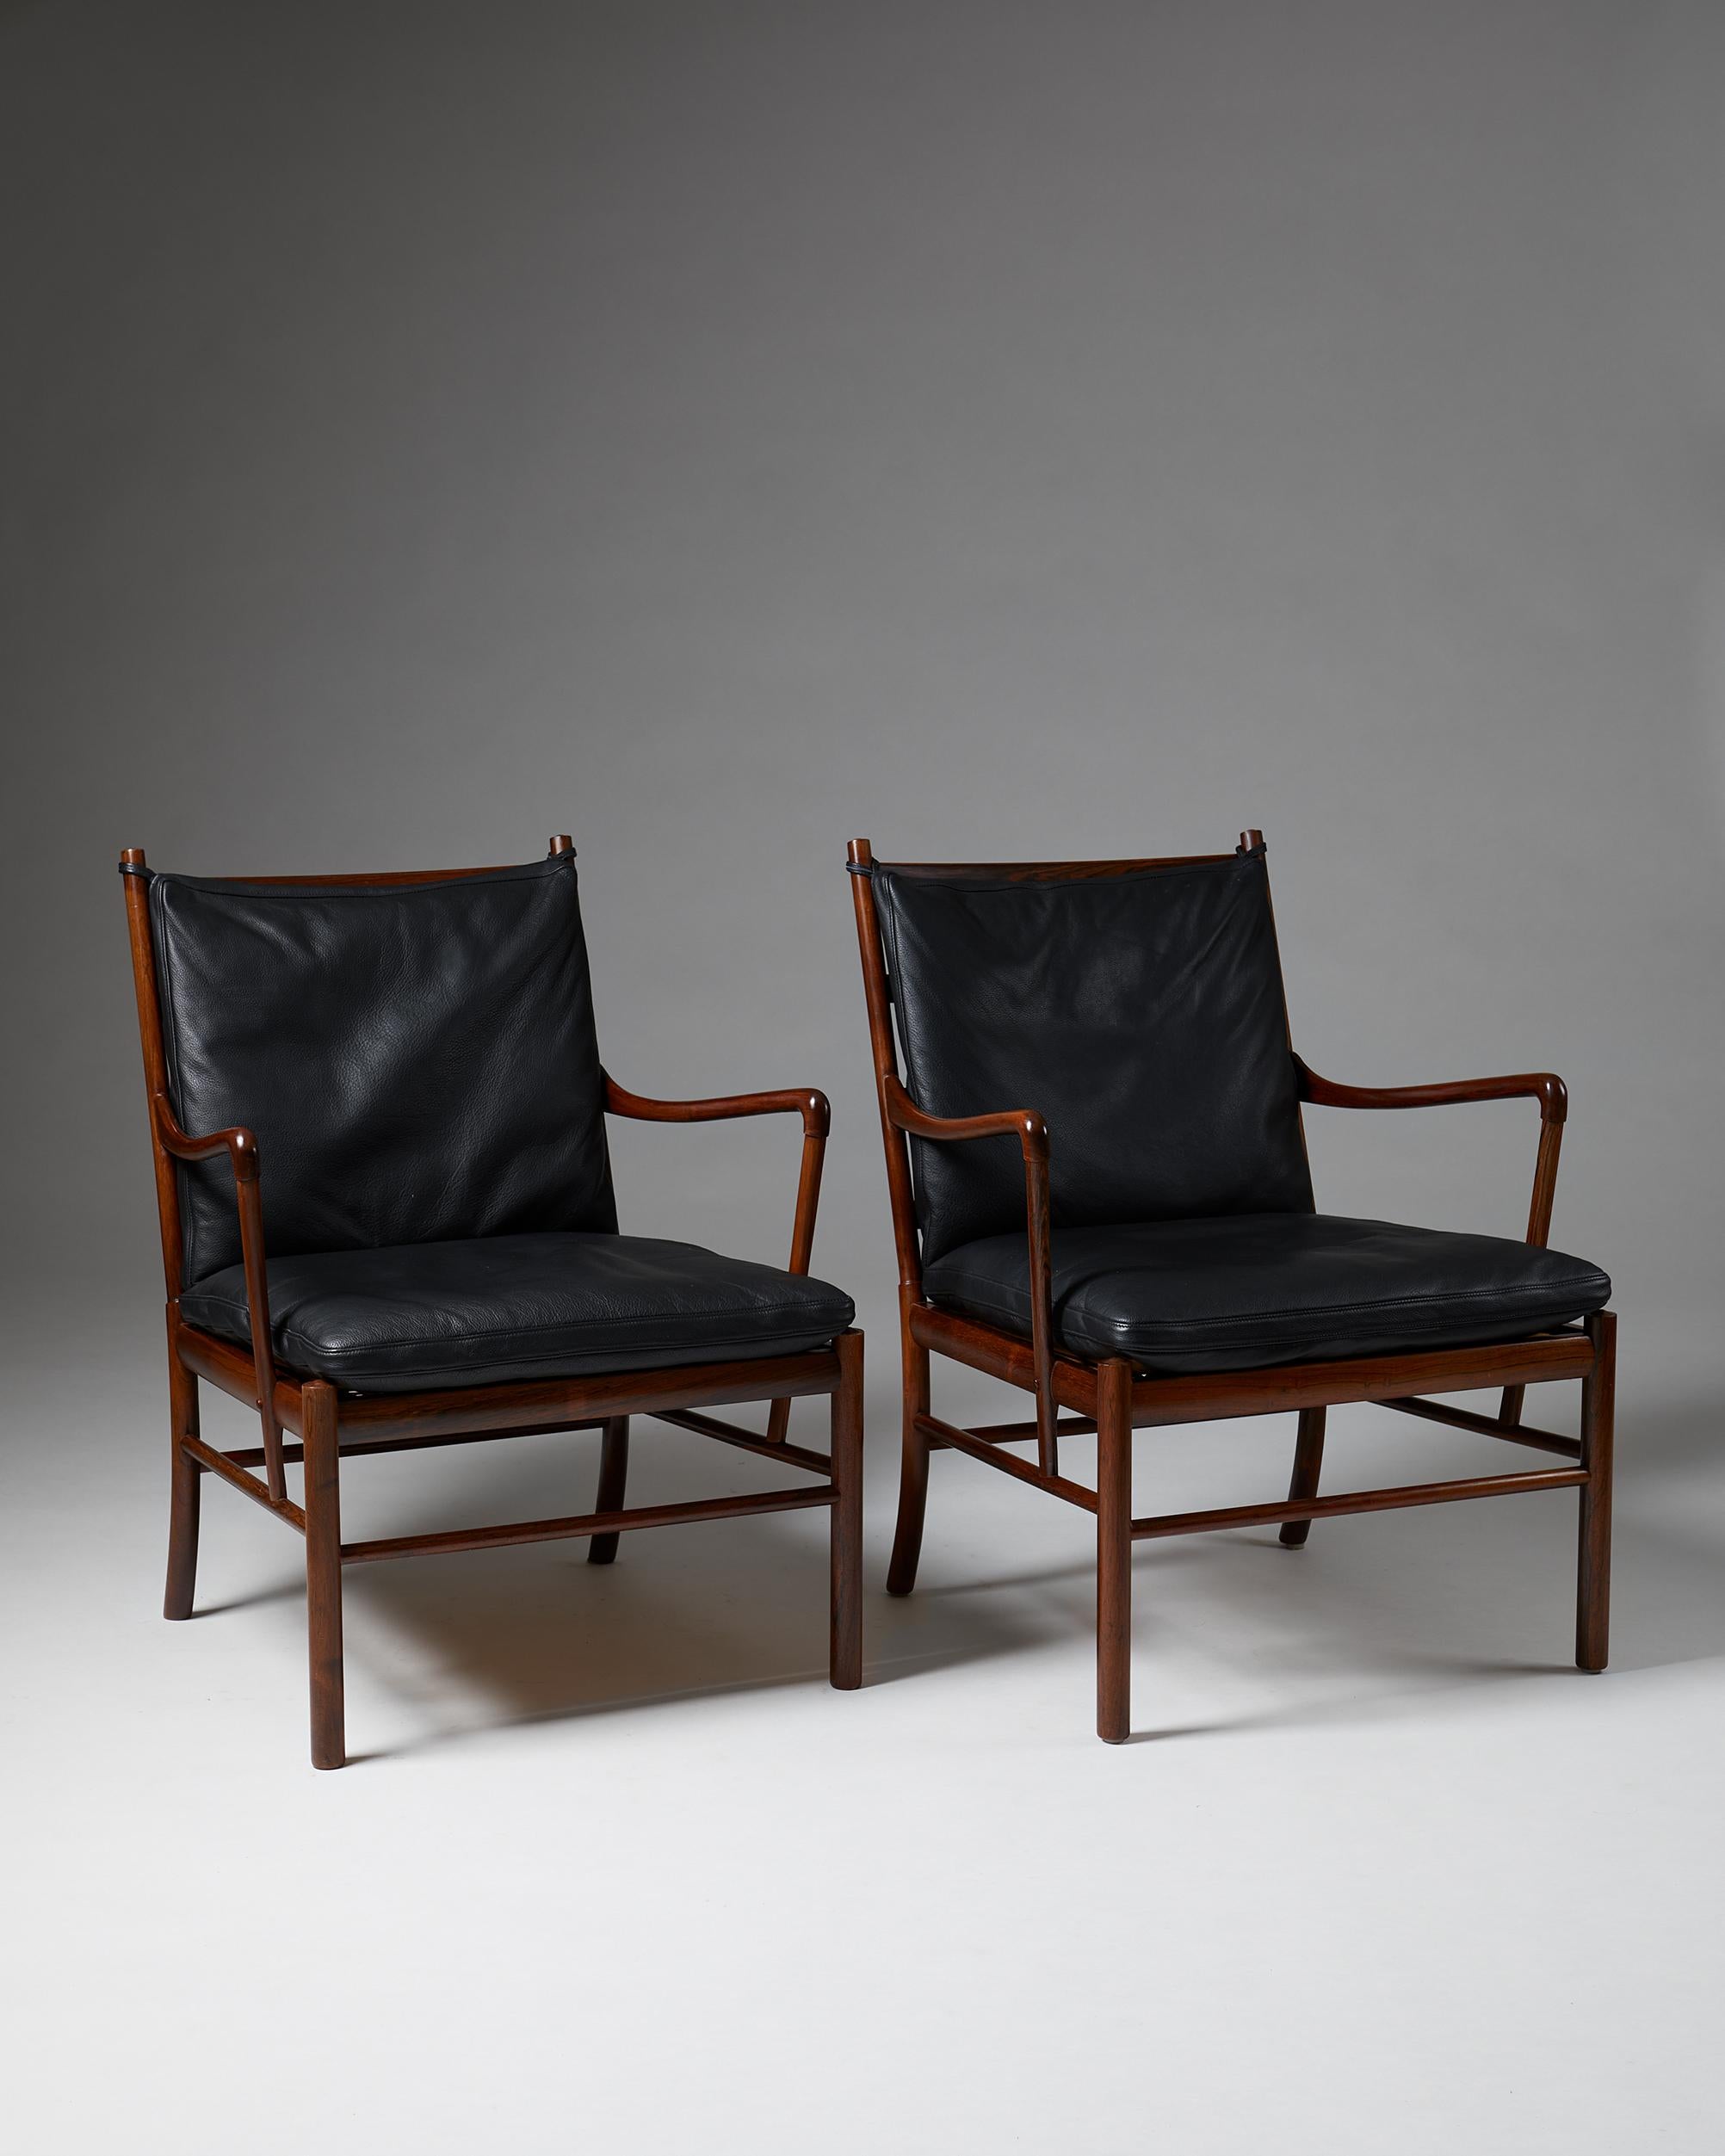 Pair of Colonial chairs model PJ 149 designed by Ole Wanscher for Poul Jeppesen,
Denmark. 1949.

Rosewood, cane and leather.

Dimensions:
H: 83 cm/ 32 3/4''
D: 70 cm/ 27 1/2''
W: 64 cm/ 25 1/4''
Seat height: 43 cm/ 17''

The Colonial Chair,